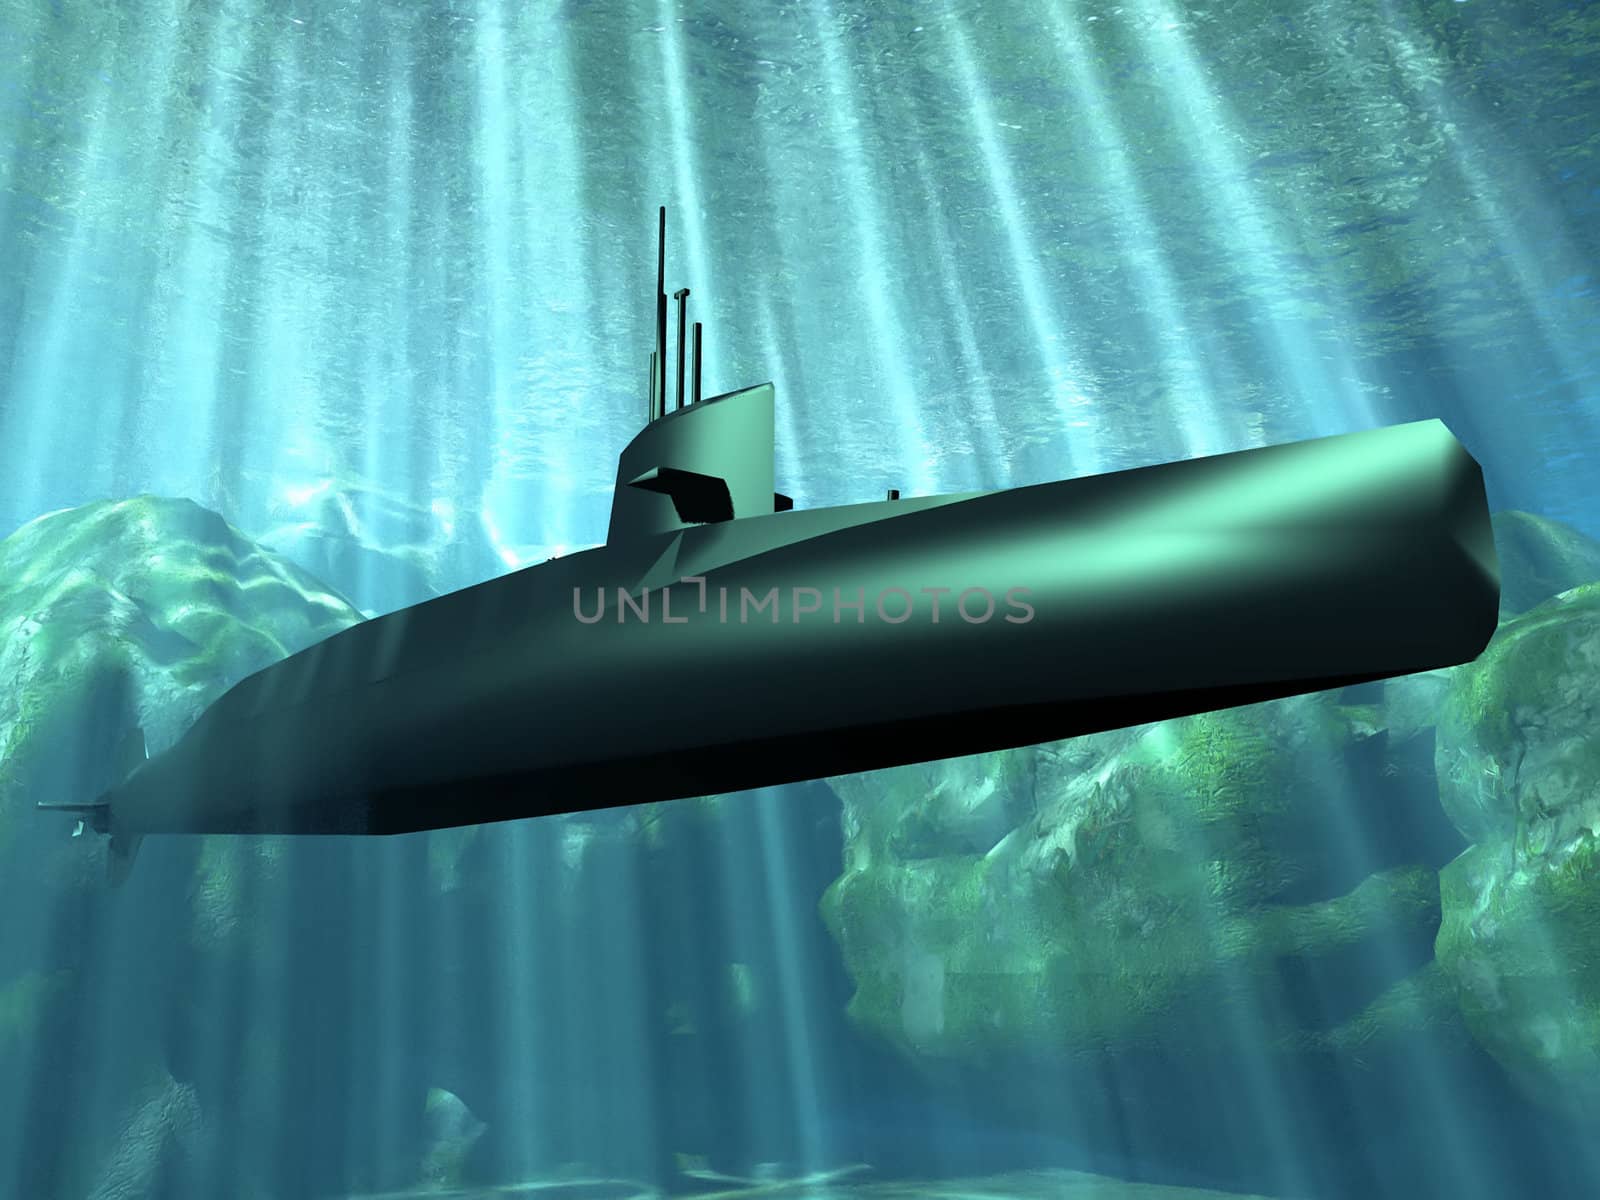 the submarine under the water